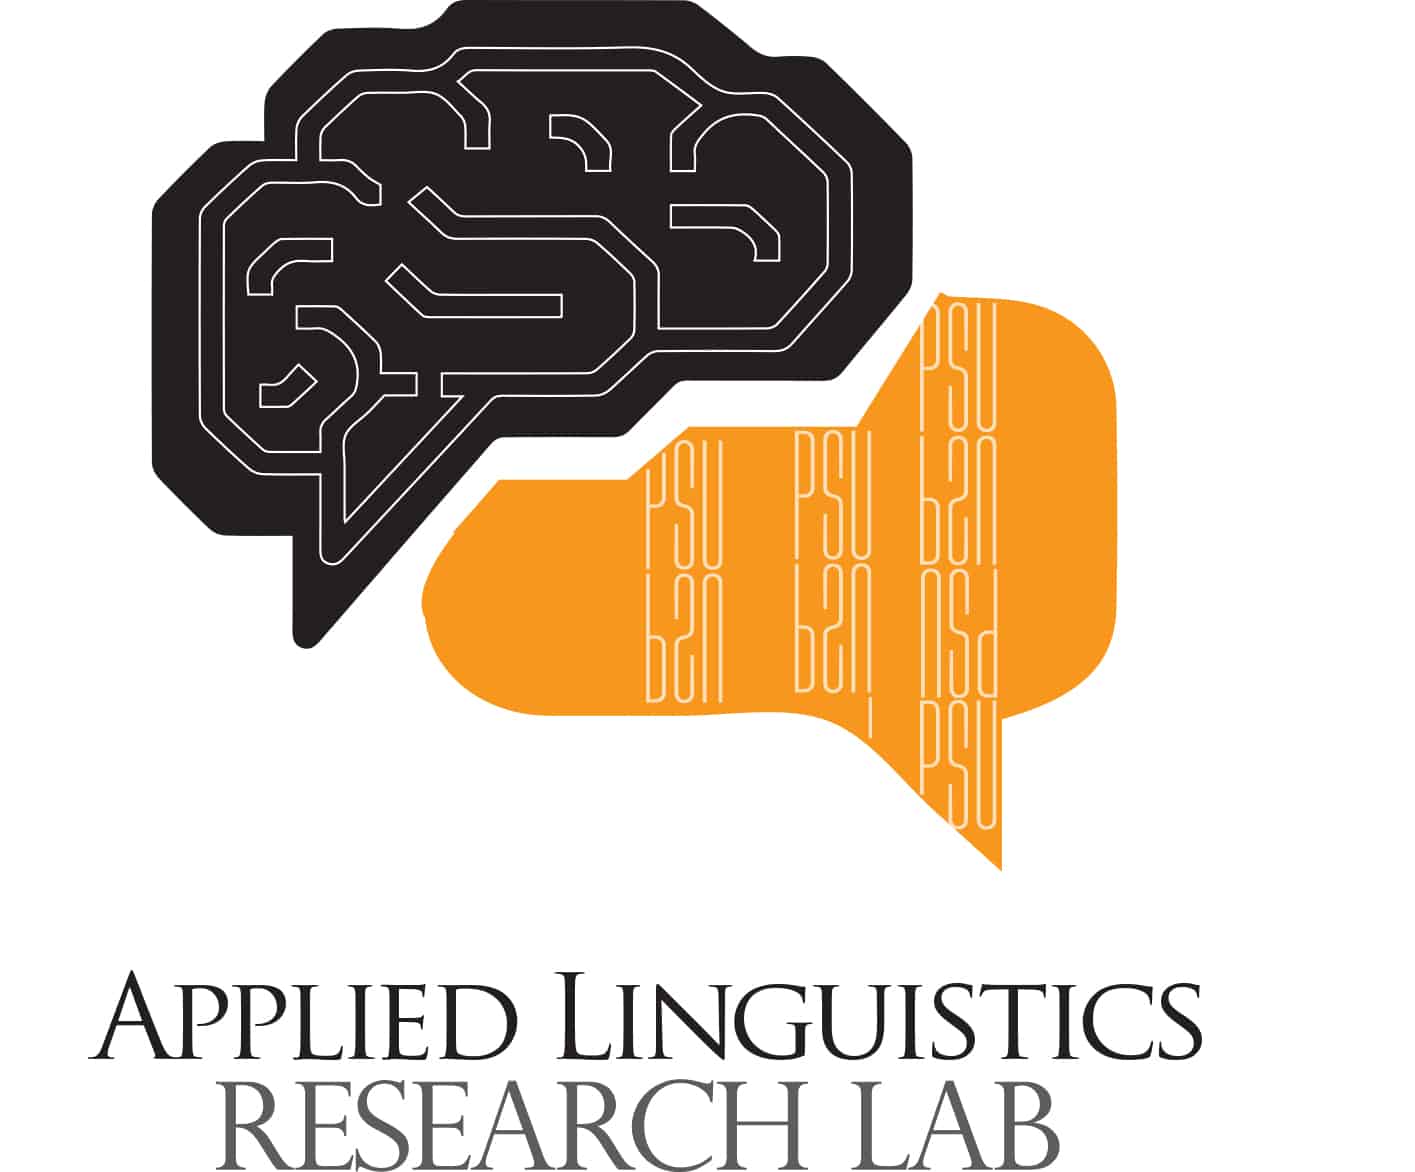 The Applied Linguistics Research Lab (ALLAB) at King Saud University and AlFaisal University